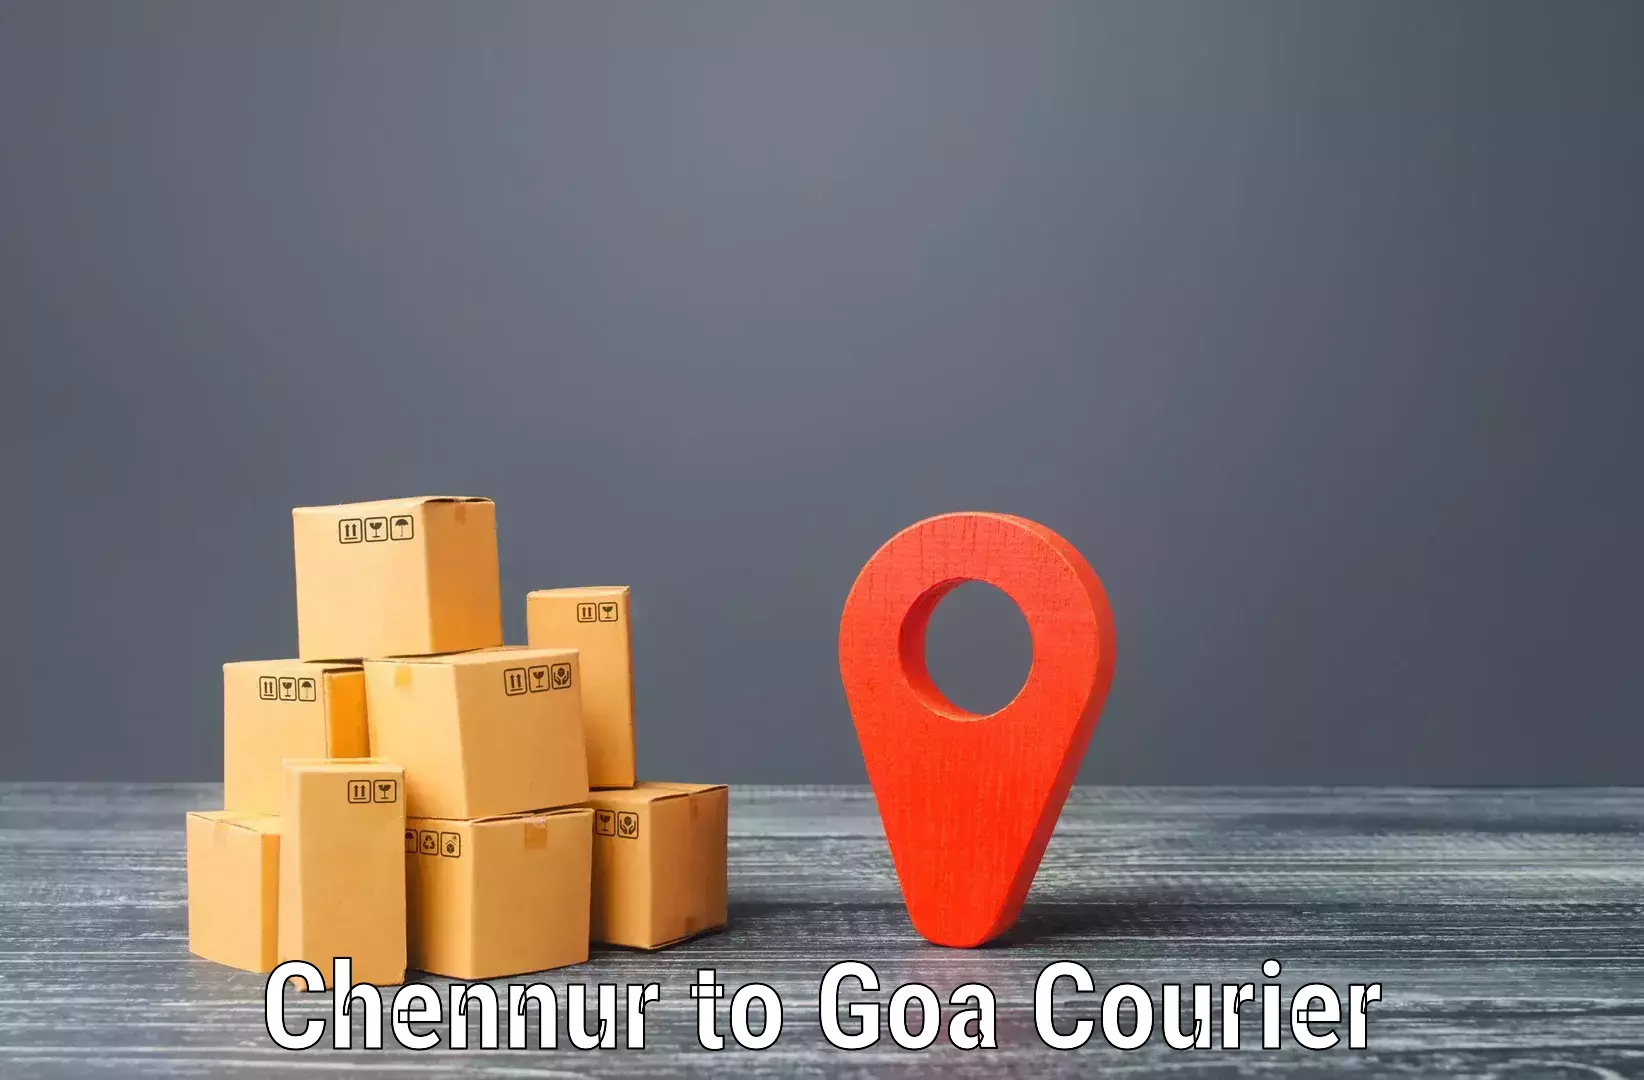 Reliable courier service in Chennur to Goa